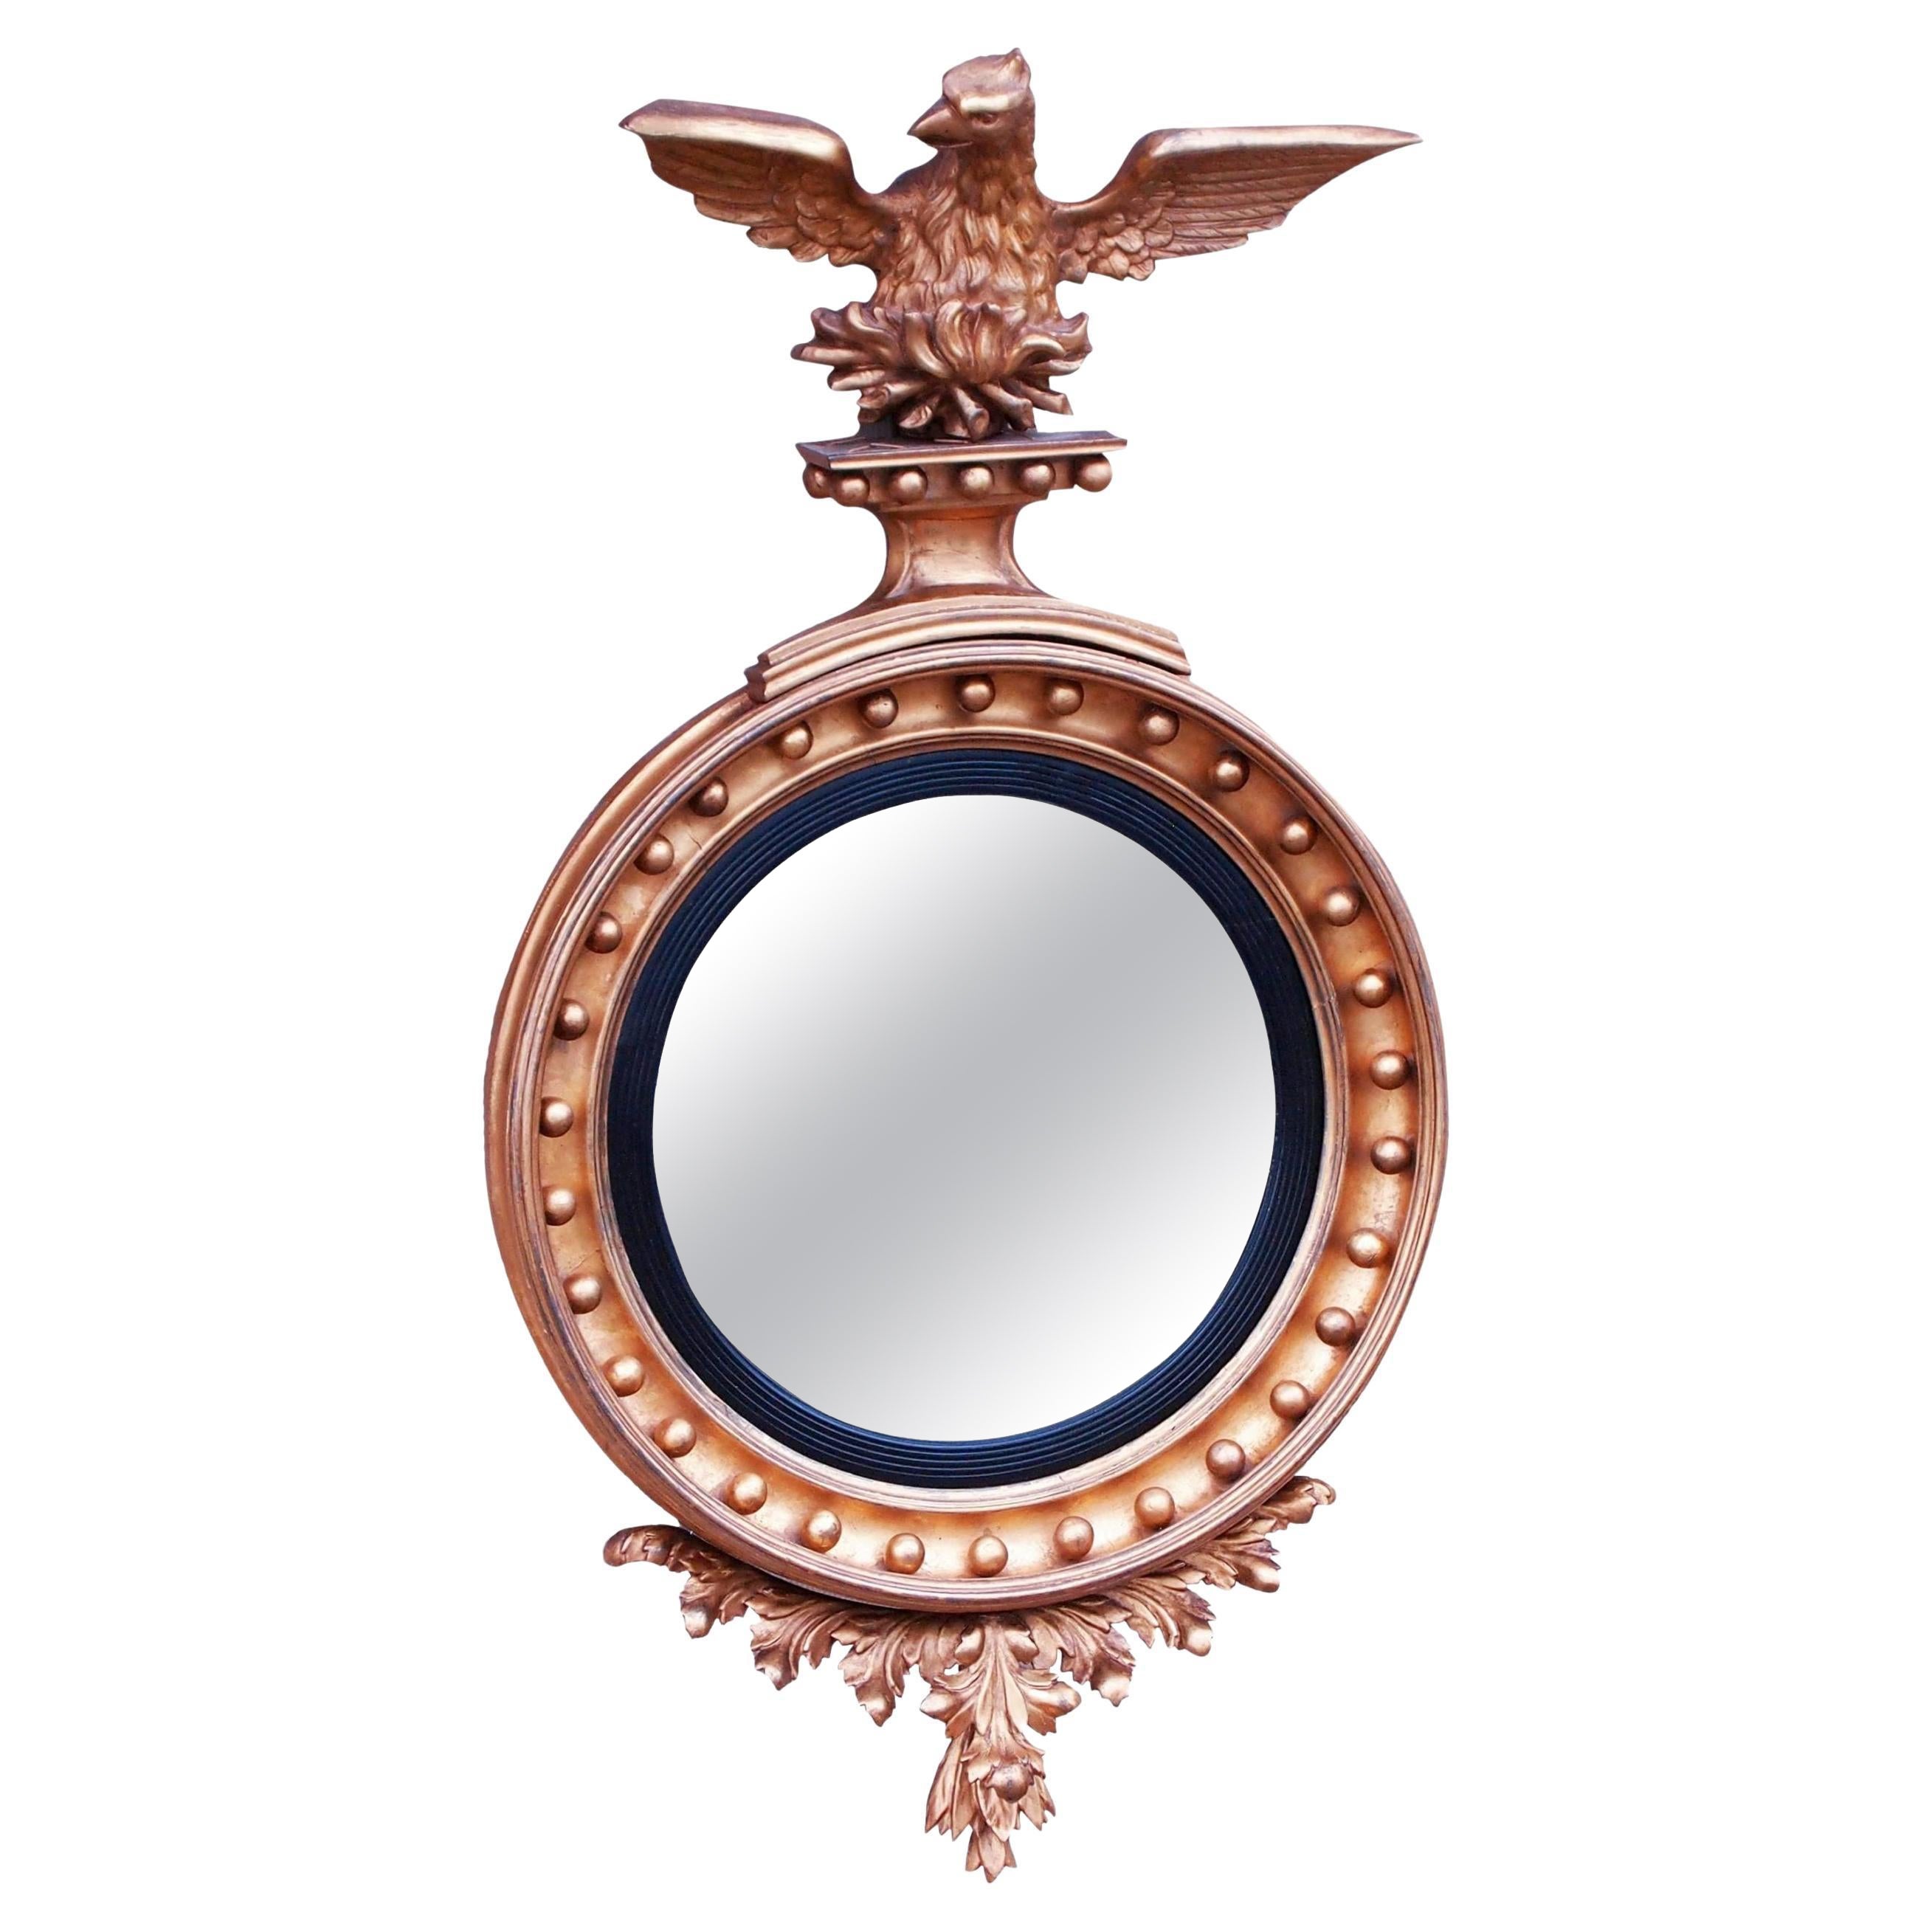 19th Century 'Regency Period, 1820s' English Giltwood Convex Mirror with Unusual For Sale